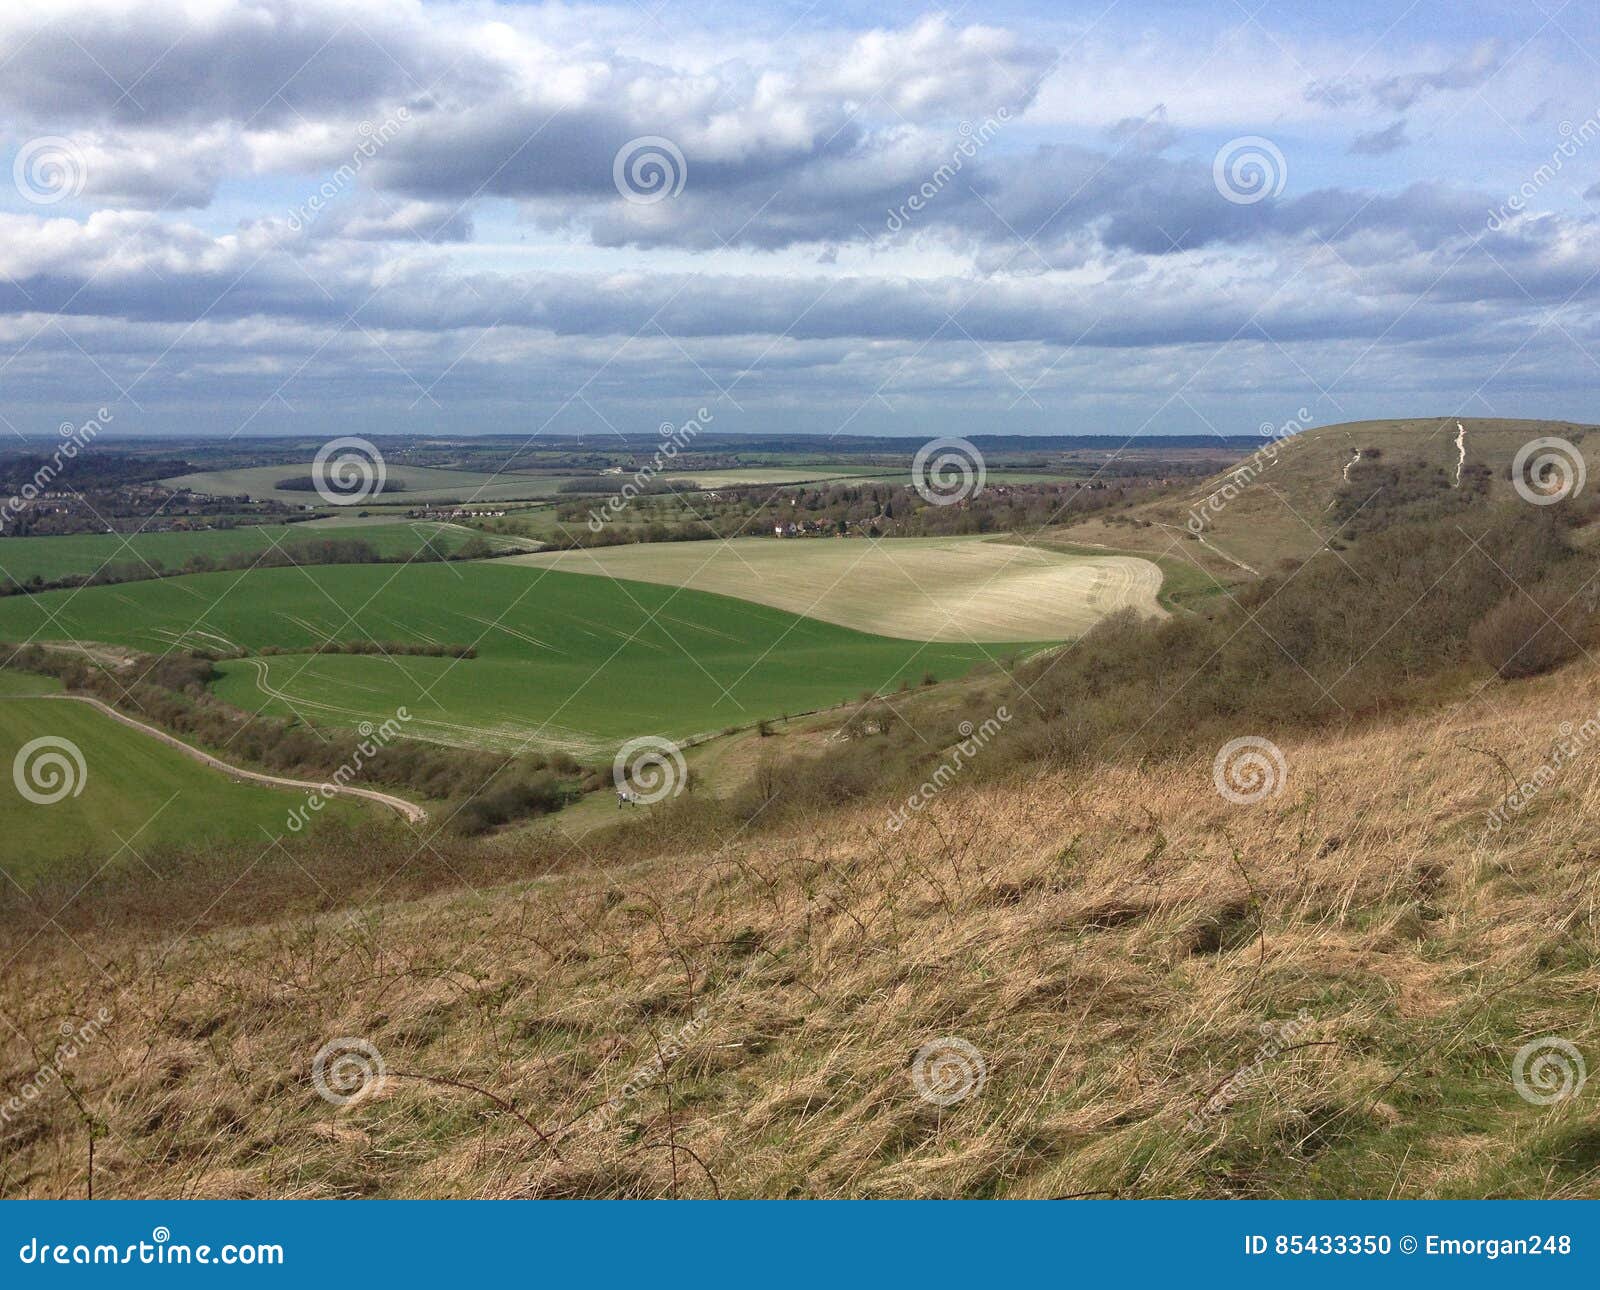 dunstable downs panorama, bedfordshire